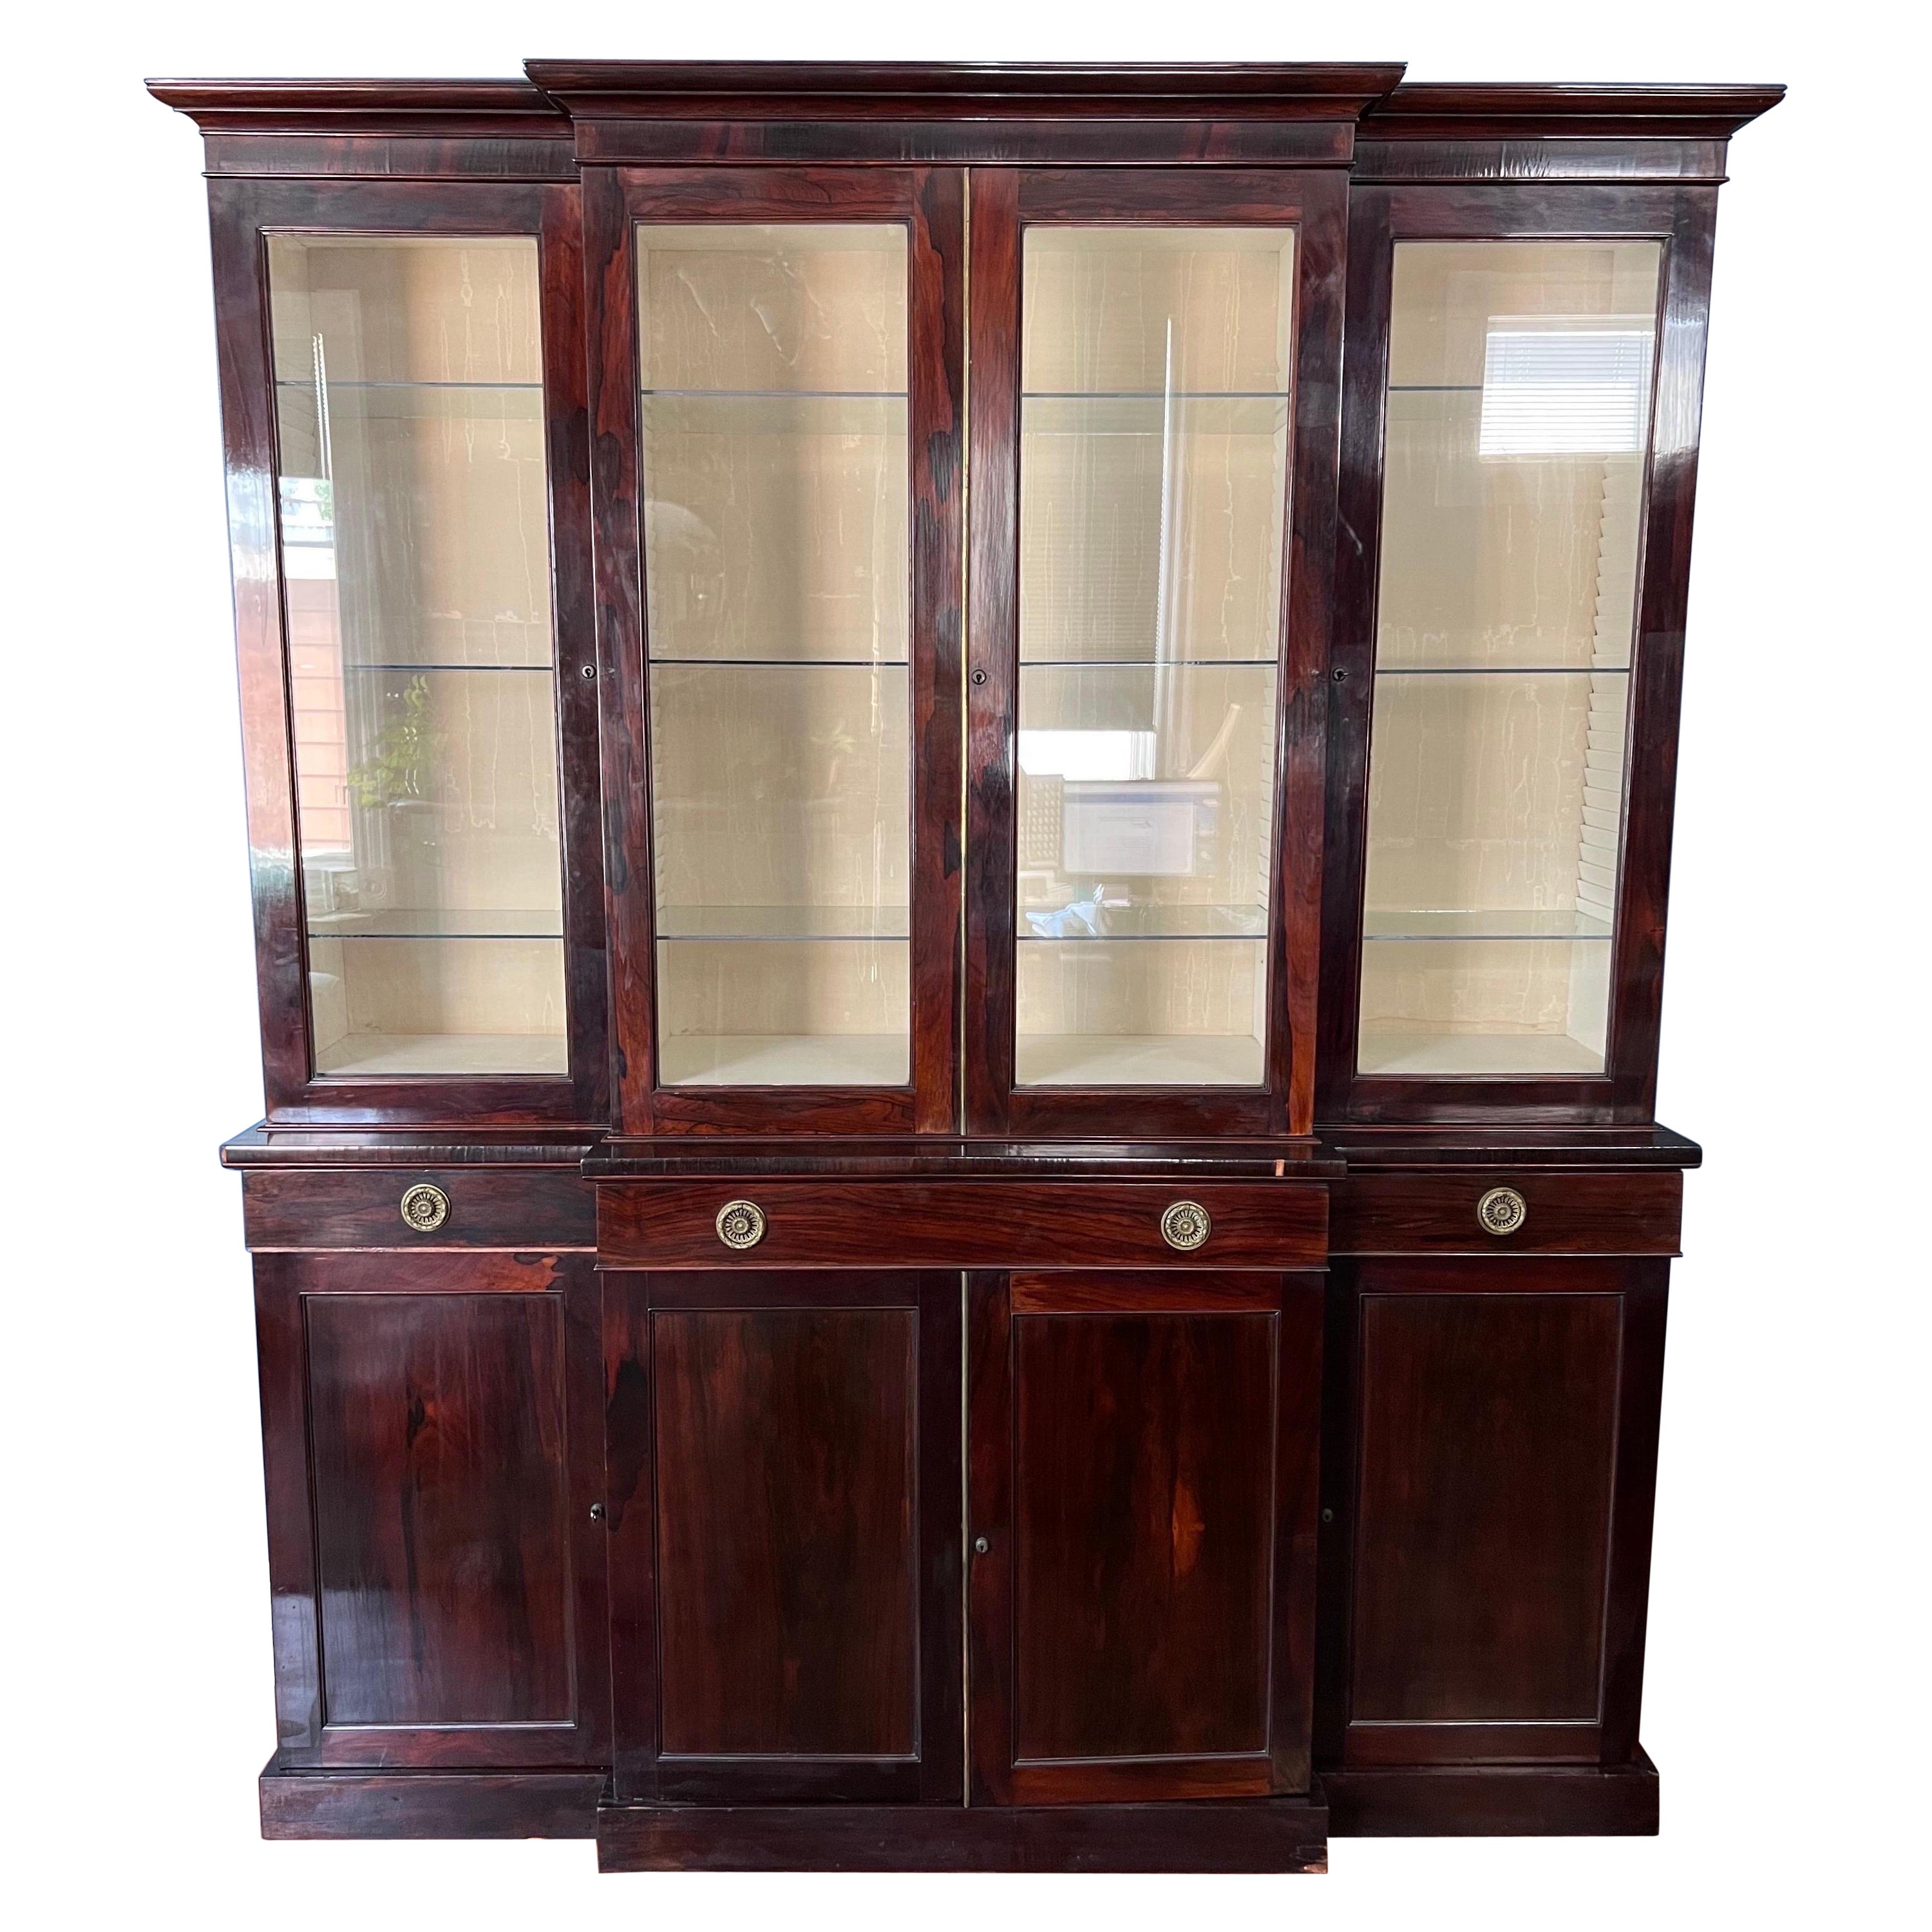 19th Century English Rosewood Breakfront Bookcase with Hidden Drawers